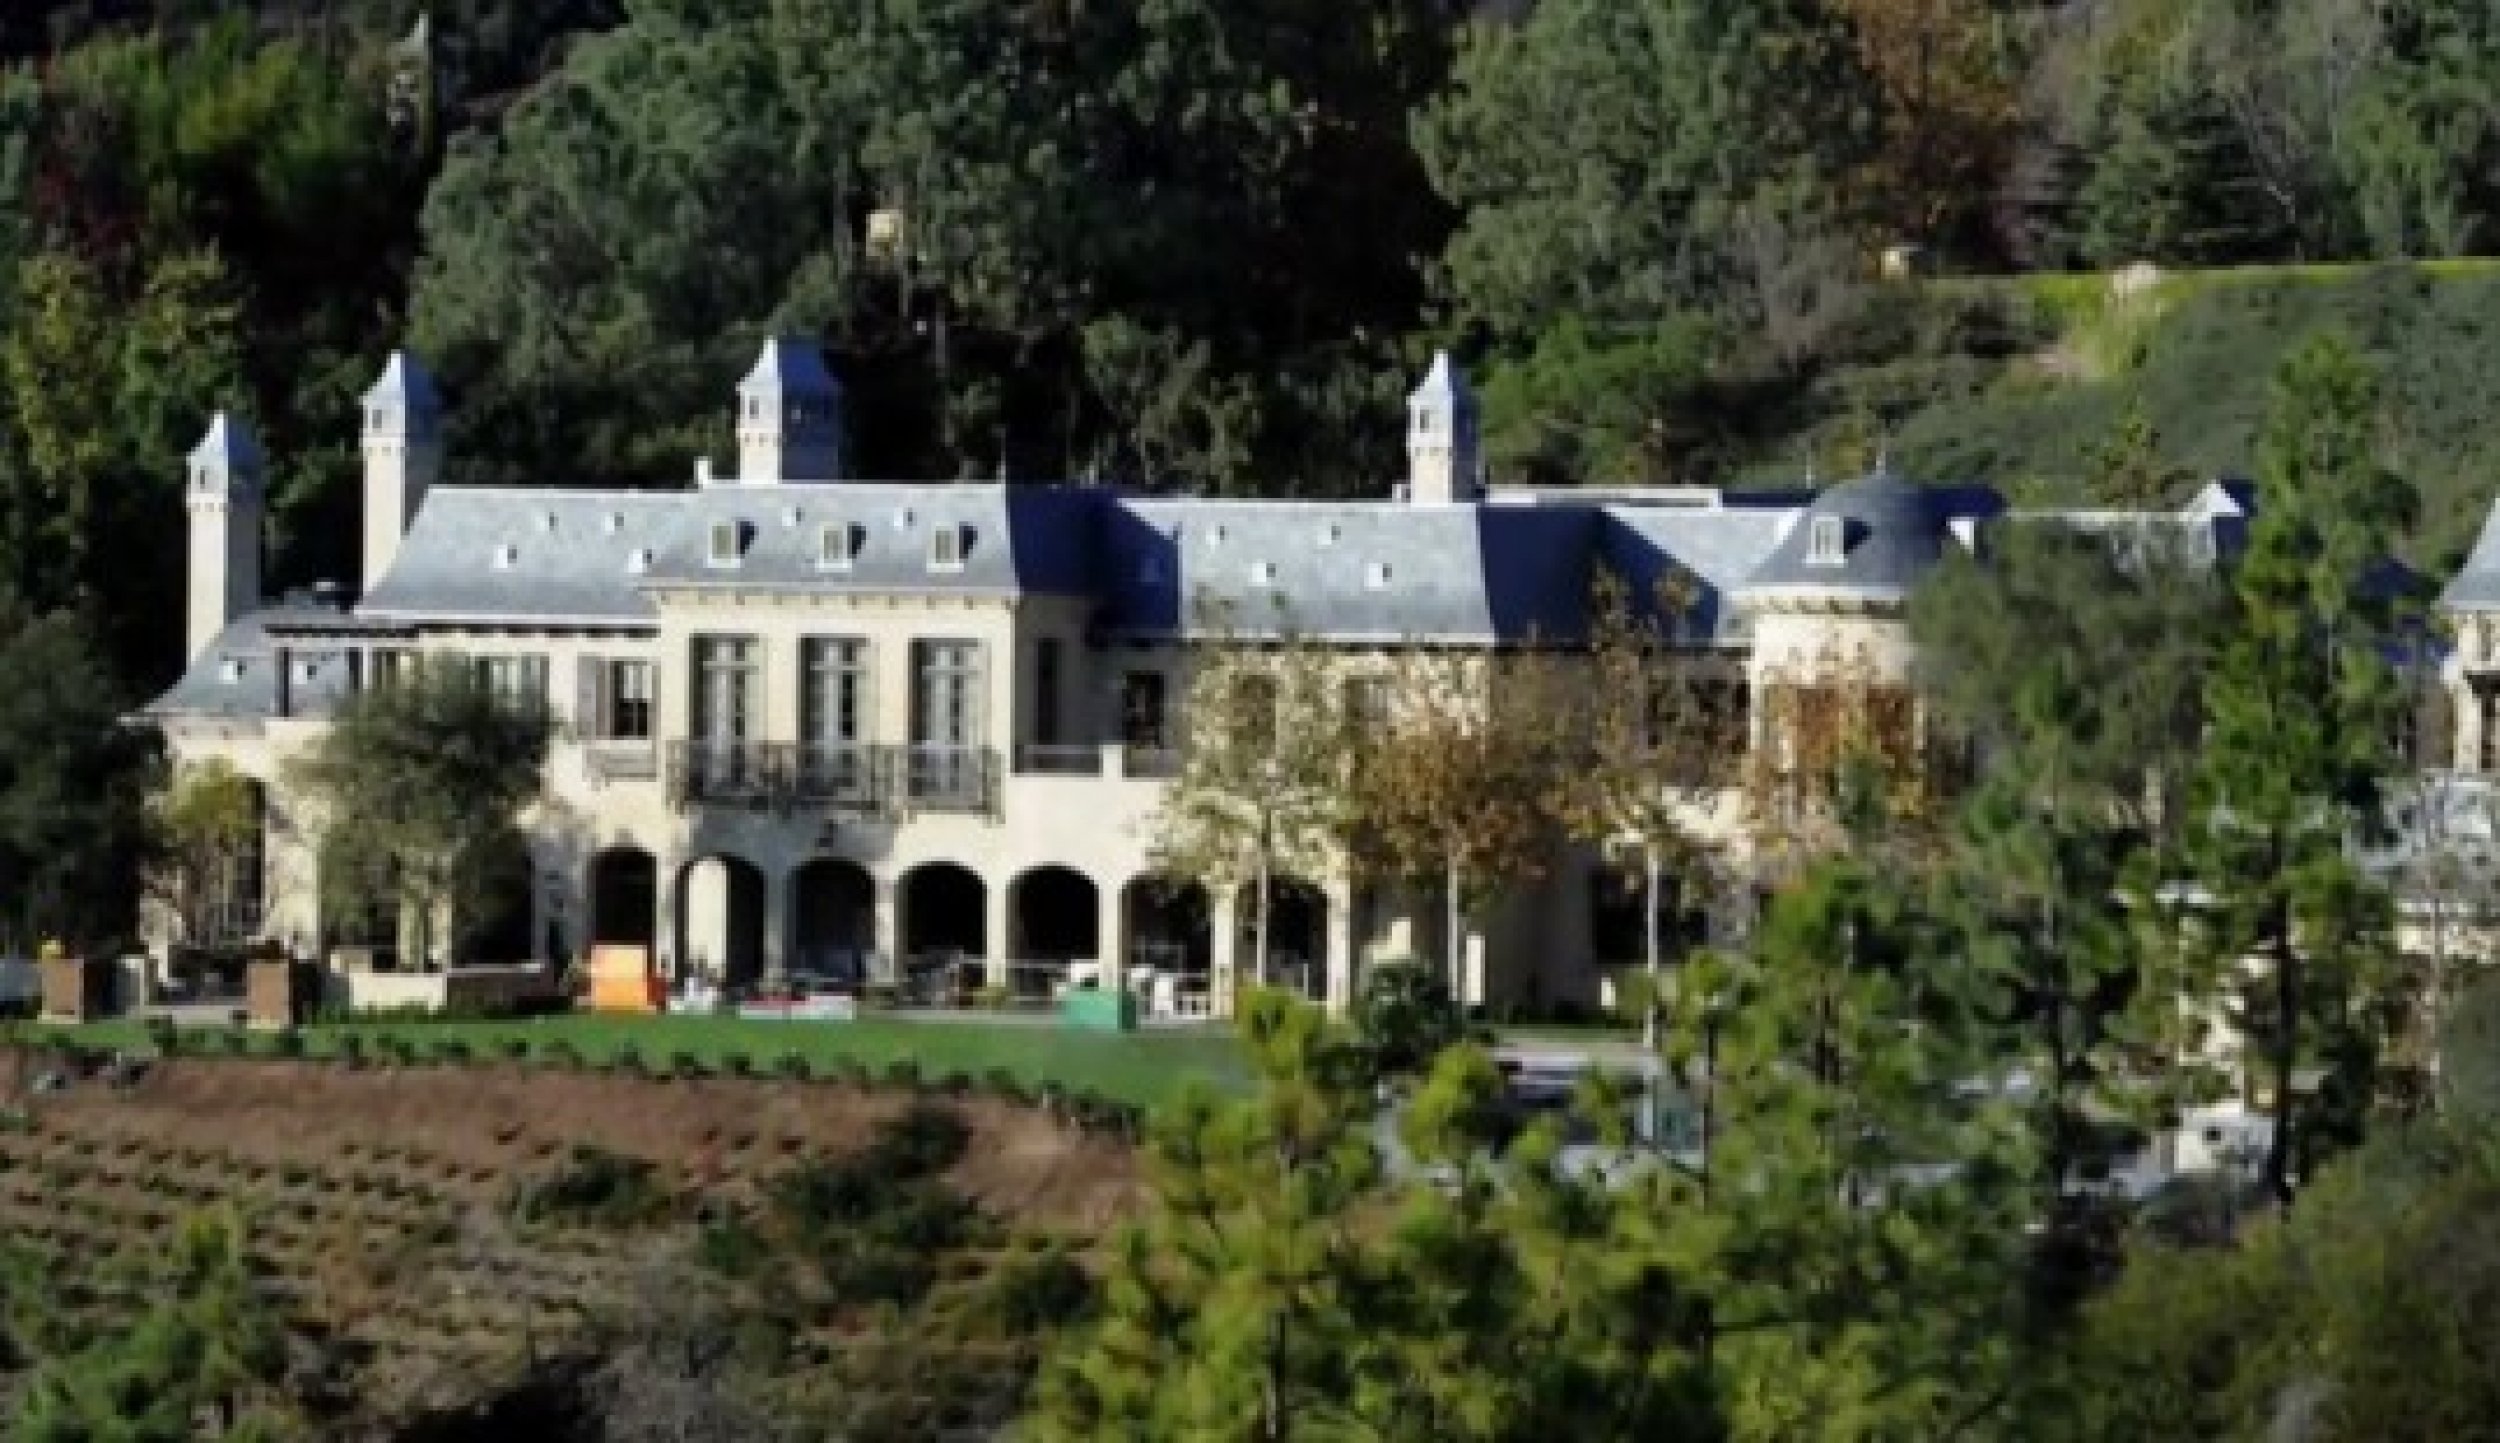 Tom Bradys palace in Brentwood